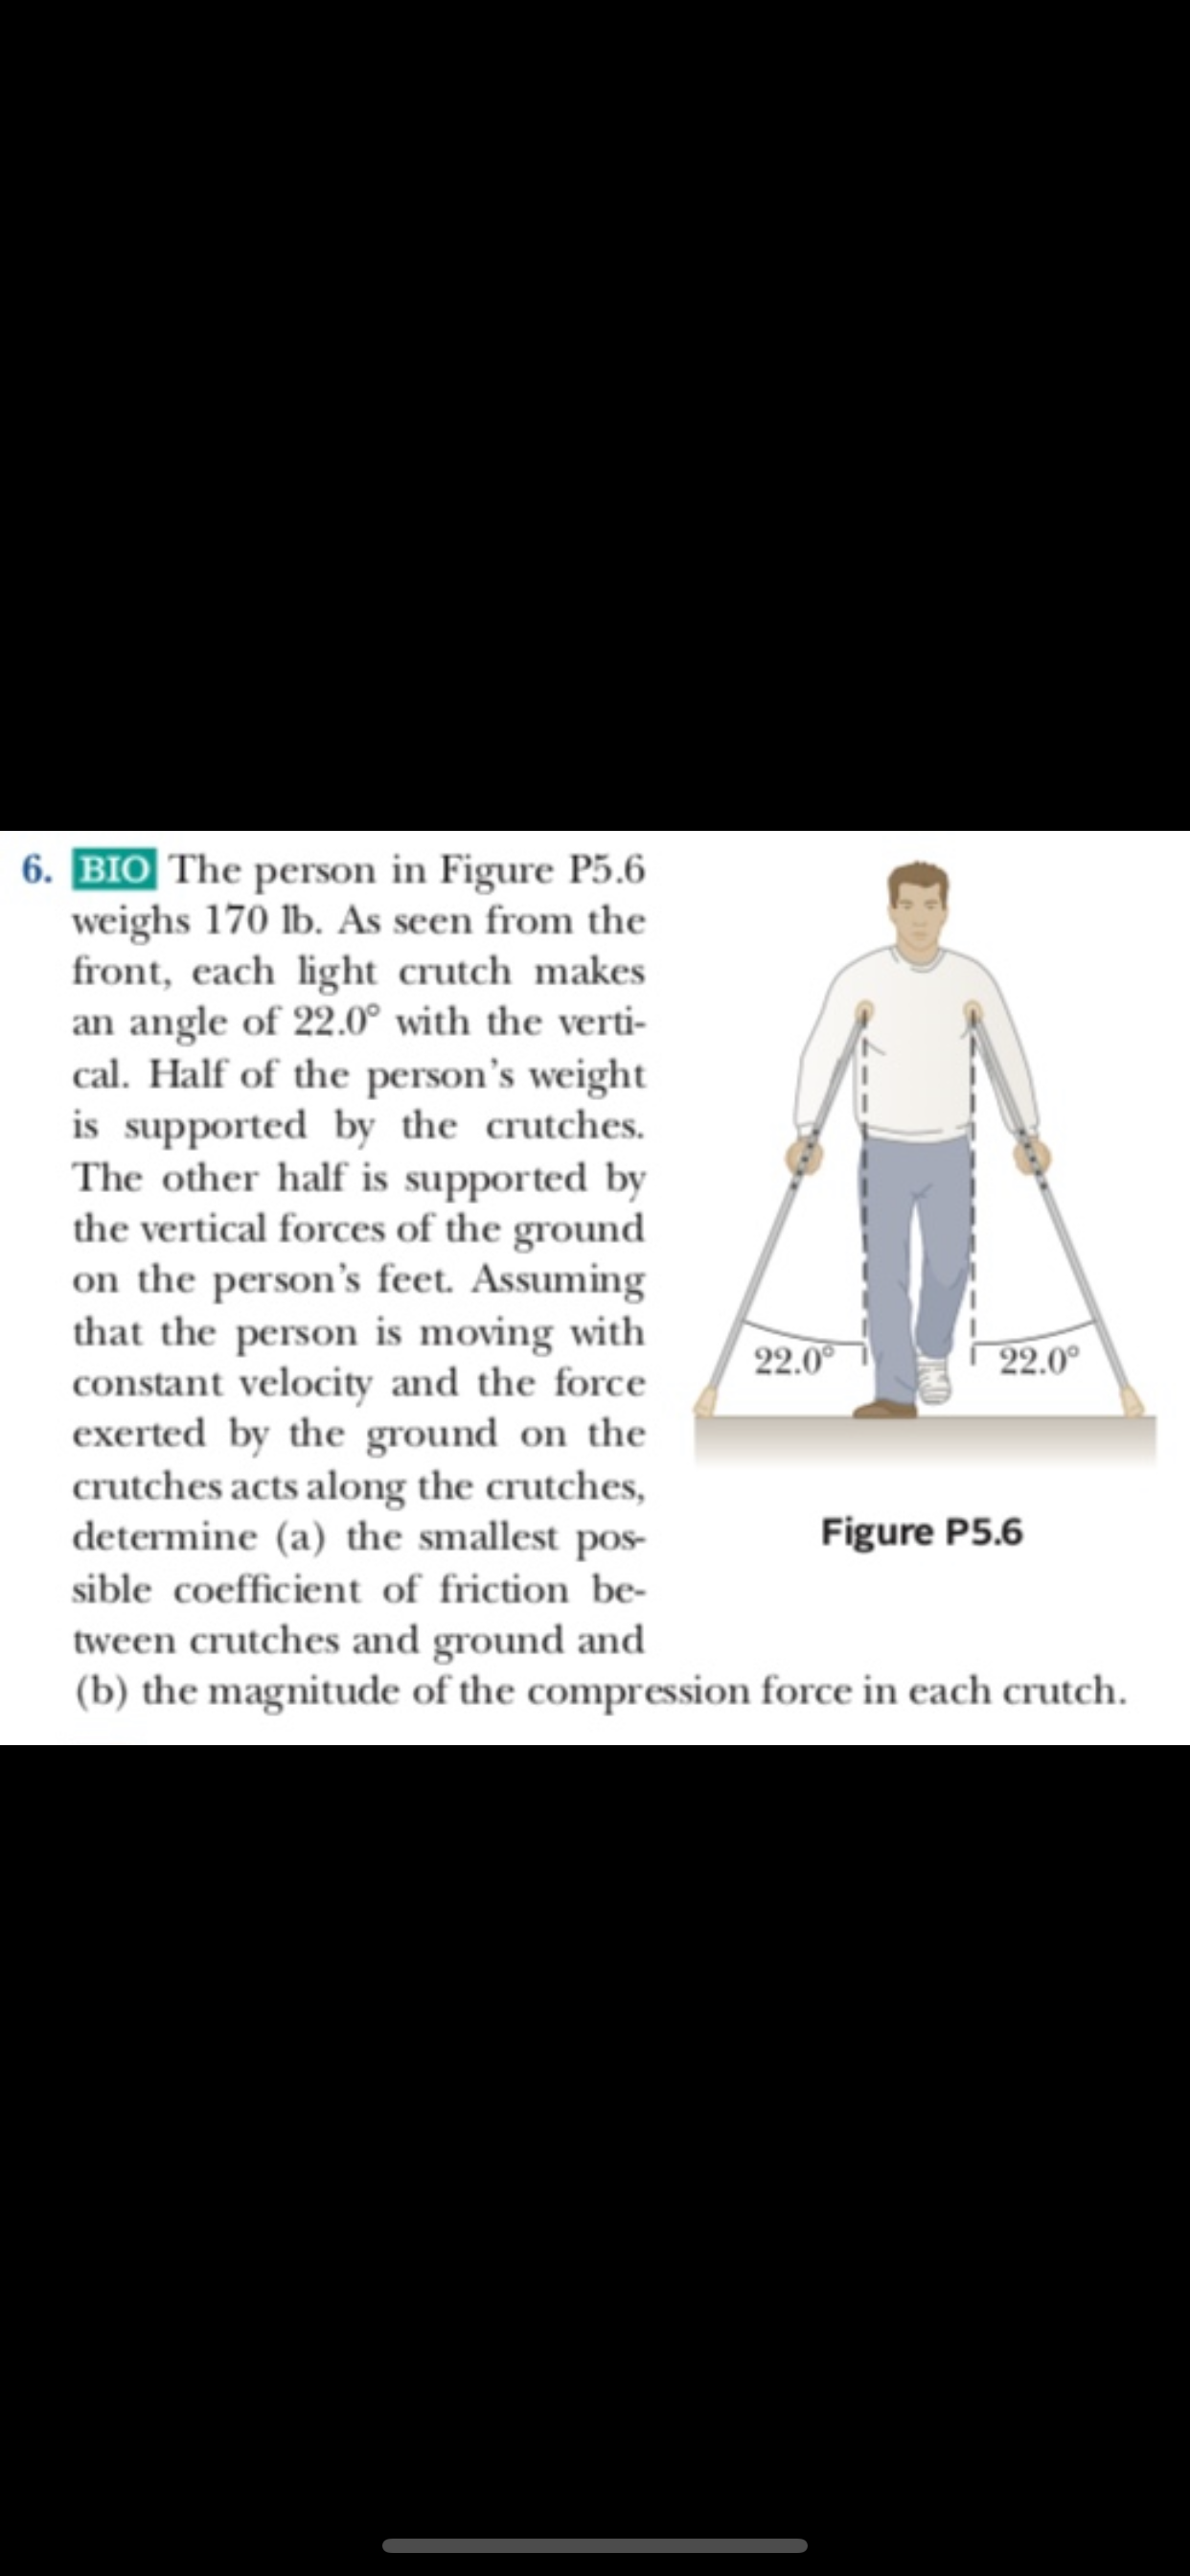 6.BIO The person in Figure P5.6
weighs 170 lb. As seen from the
front, each light crutch makes
an angle of 22.0° with the verti
cal. Half of the person's weight
is supported by the crutches
The other half is supported by
the vertical forces of the ground
on the person's feet. Assuming
that the person is moving with
constant velocity and the force
exerted by the ground on the
crutches acts along the crutches,
determine (a) the smallest pos
22.0
22.0
Figure P5.6
sible coefficient of friction be-
tween crutches and ground and
(b) the magnitude of the compression force in each crutch
